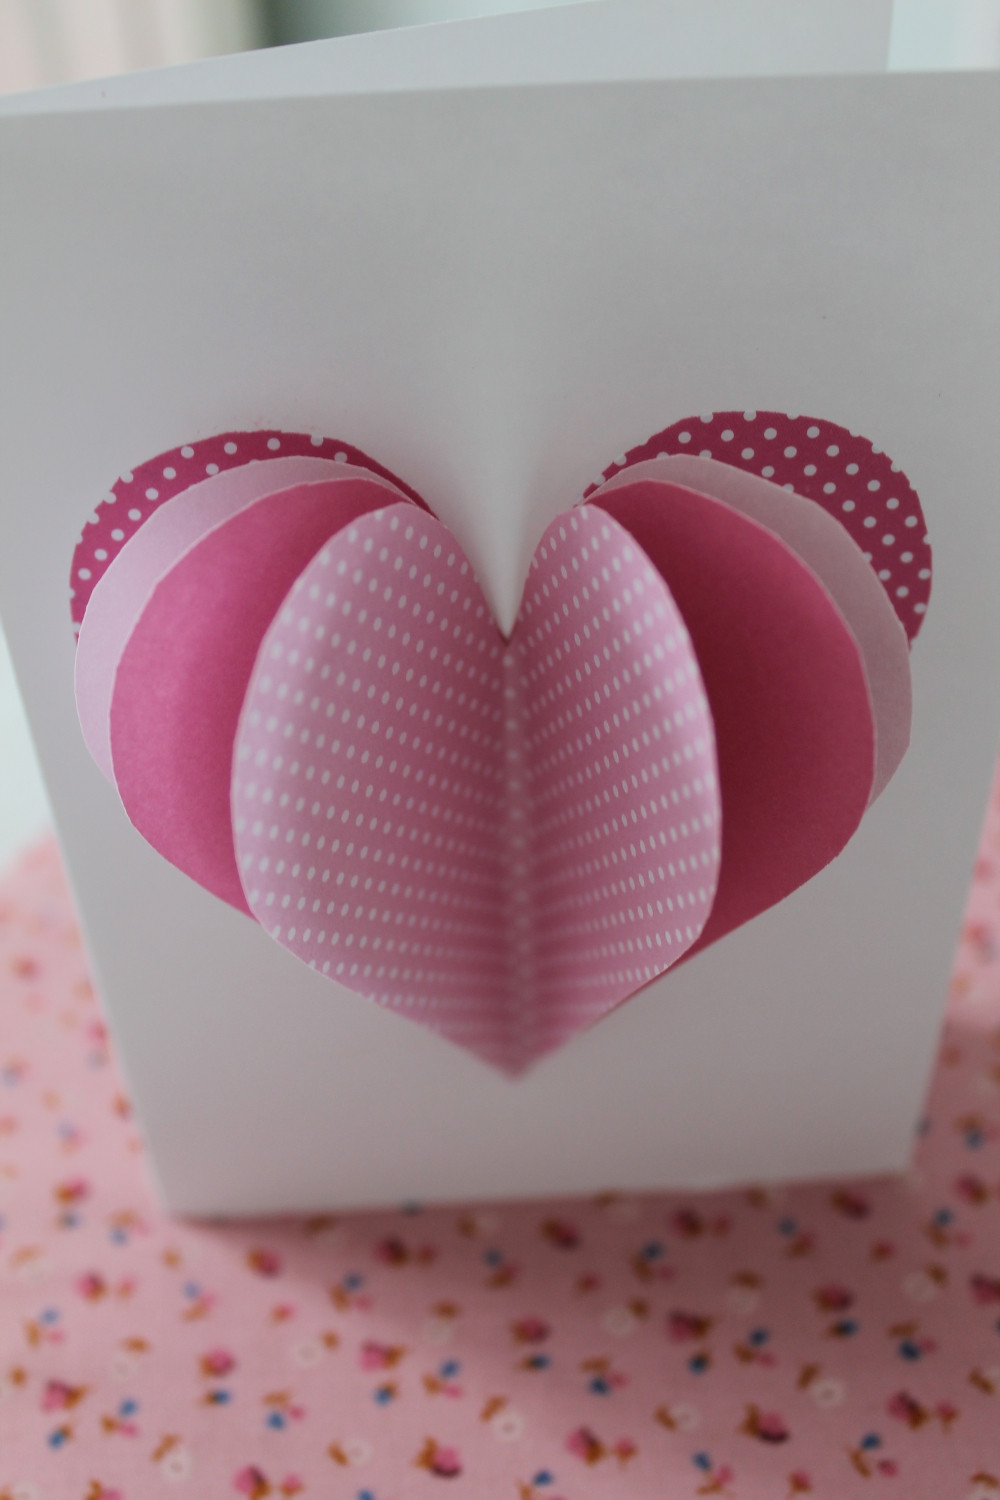 Valentines Day Cards Ideas
 Lover of Vintage valentines card